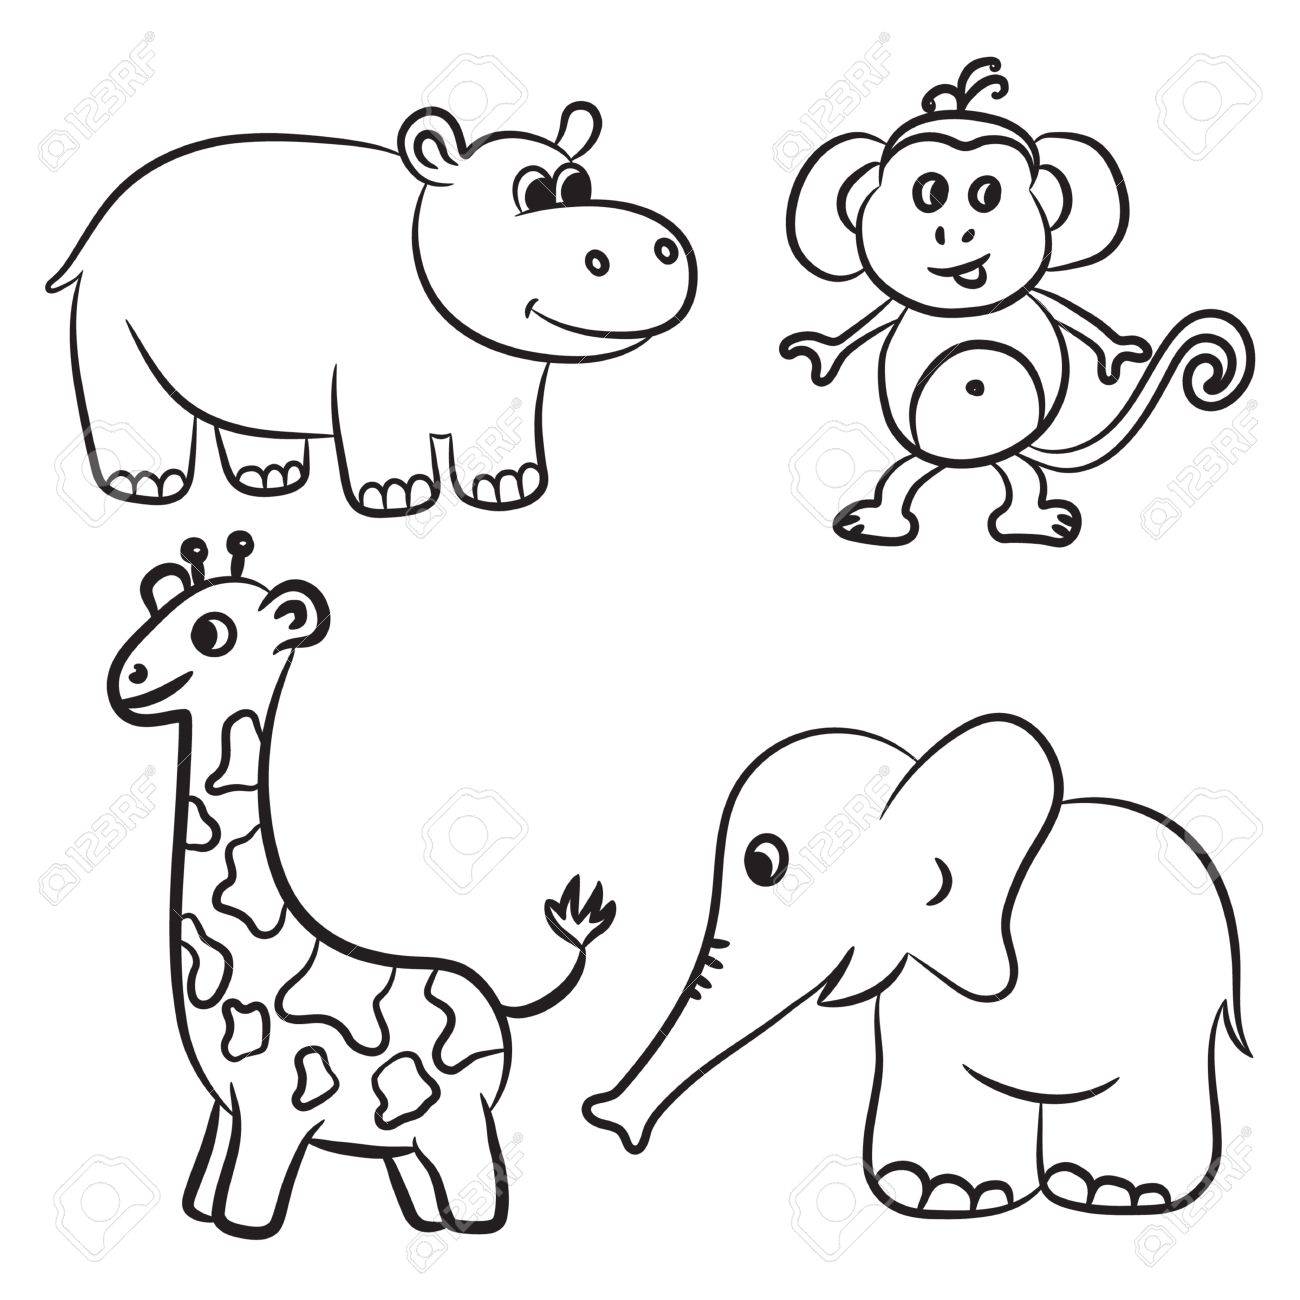 Clipart zoo animals black and white